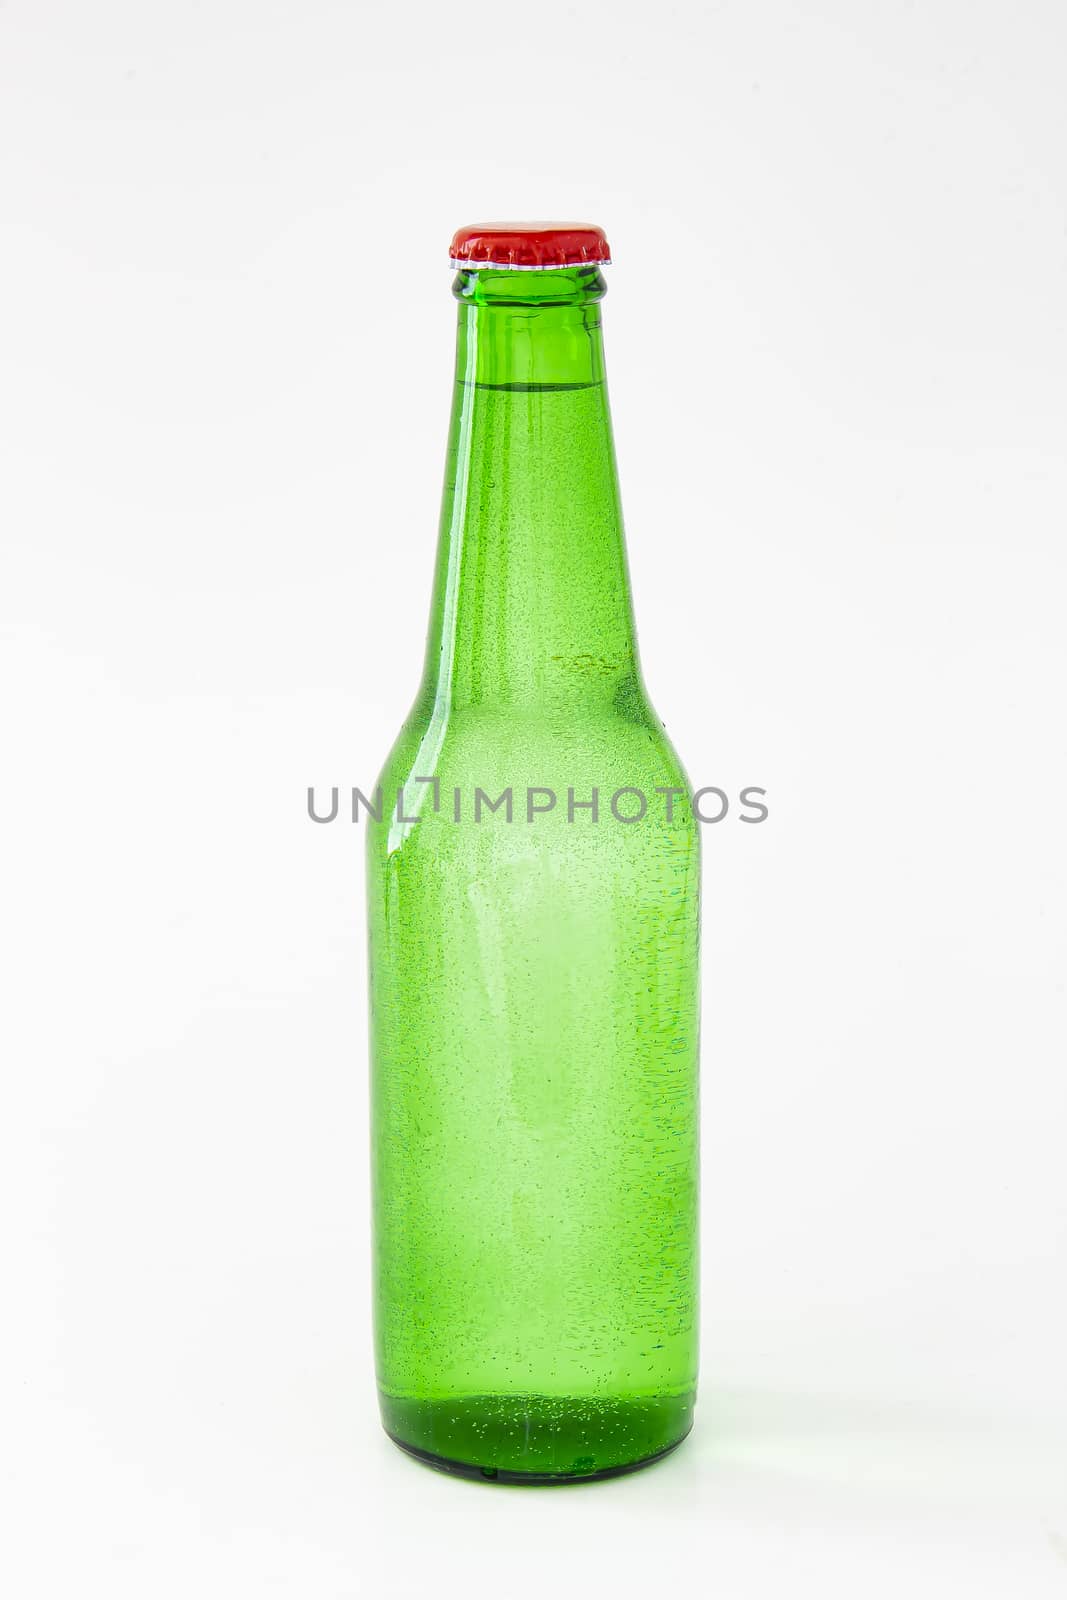 Green Beer Bottle isolated on white background by oasisamuel